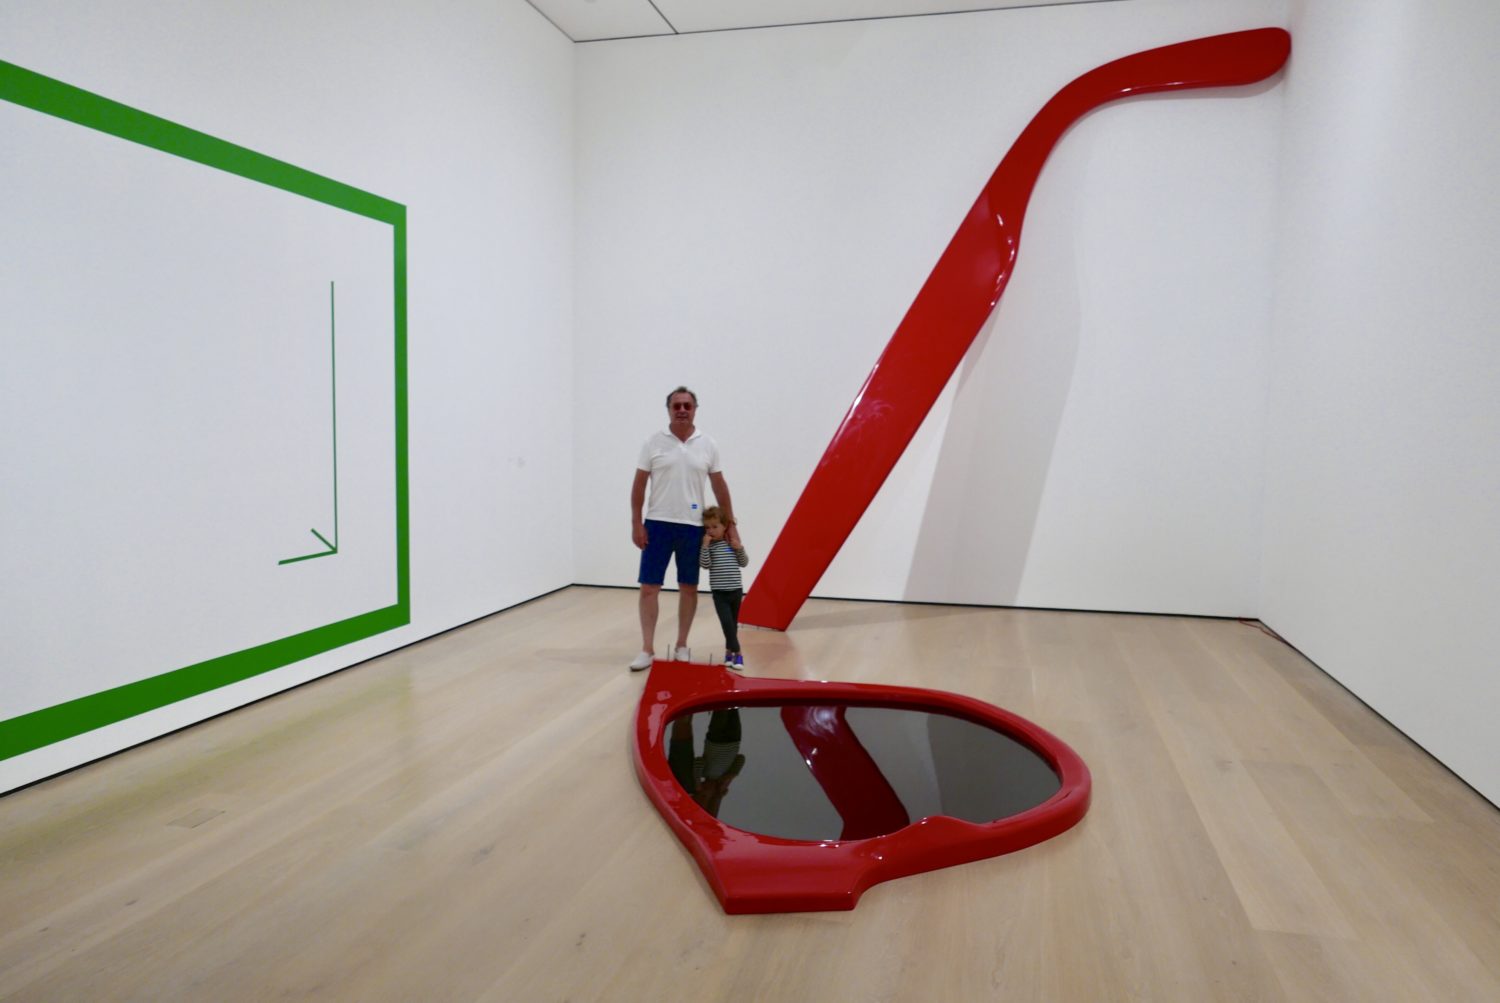 A man standing in front of a red and green sculpture at The Hammer Museum.